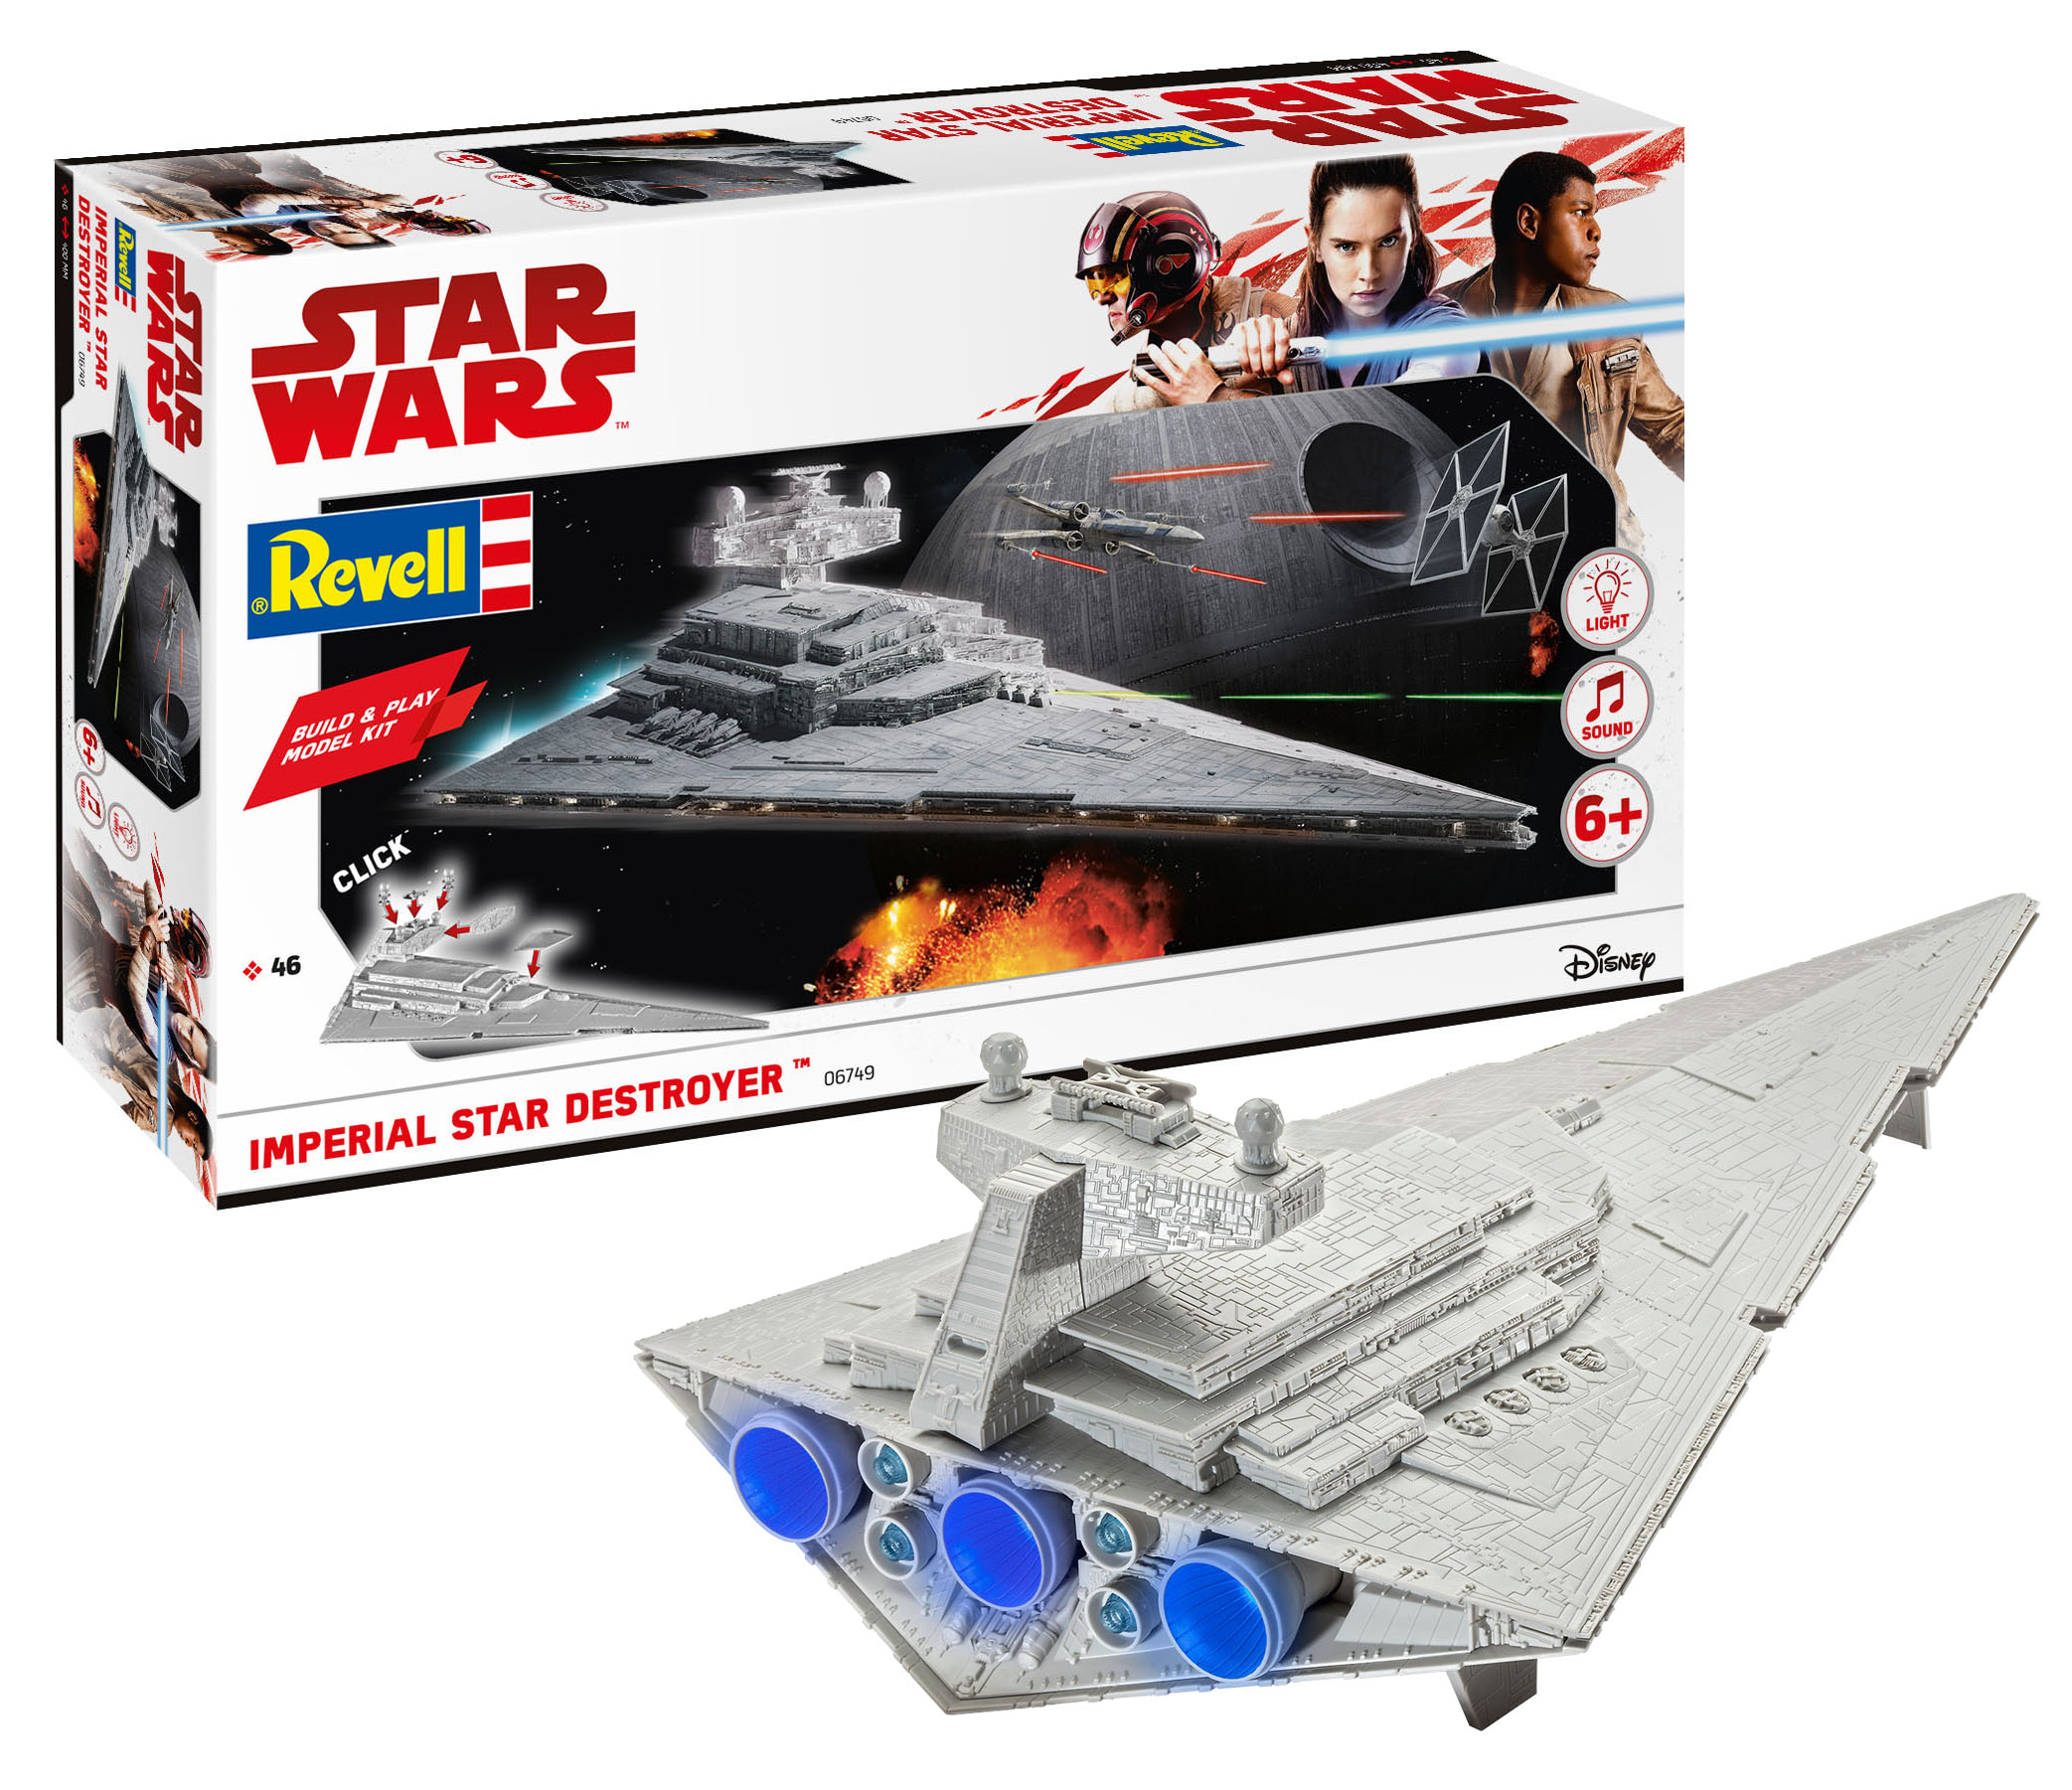 Revell Star Wars Rogue One Imperial Star Destroyer Model Kit 